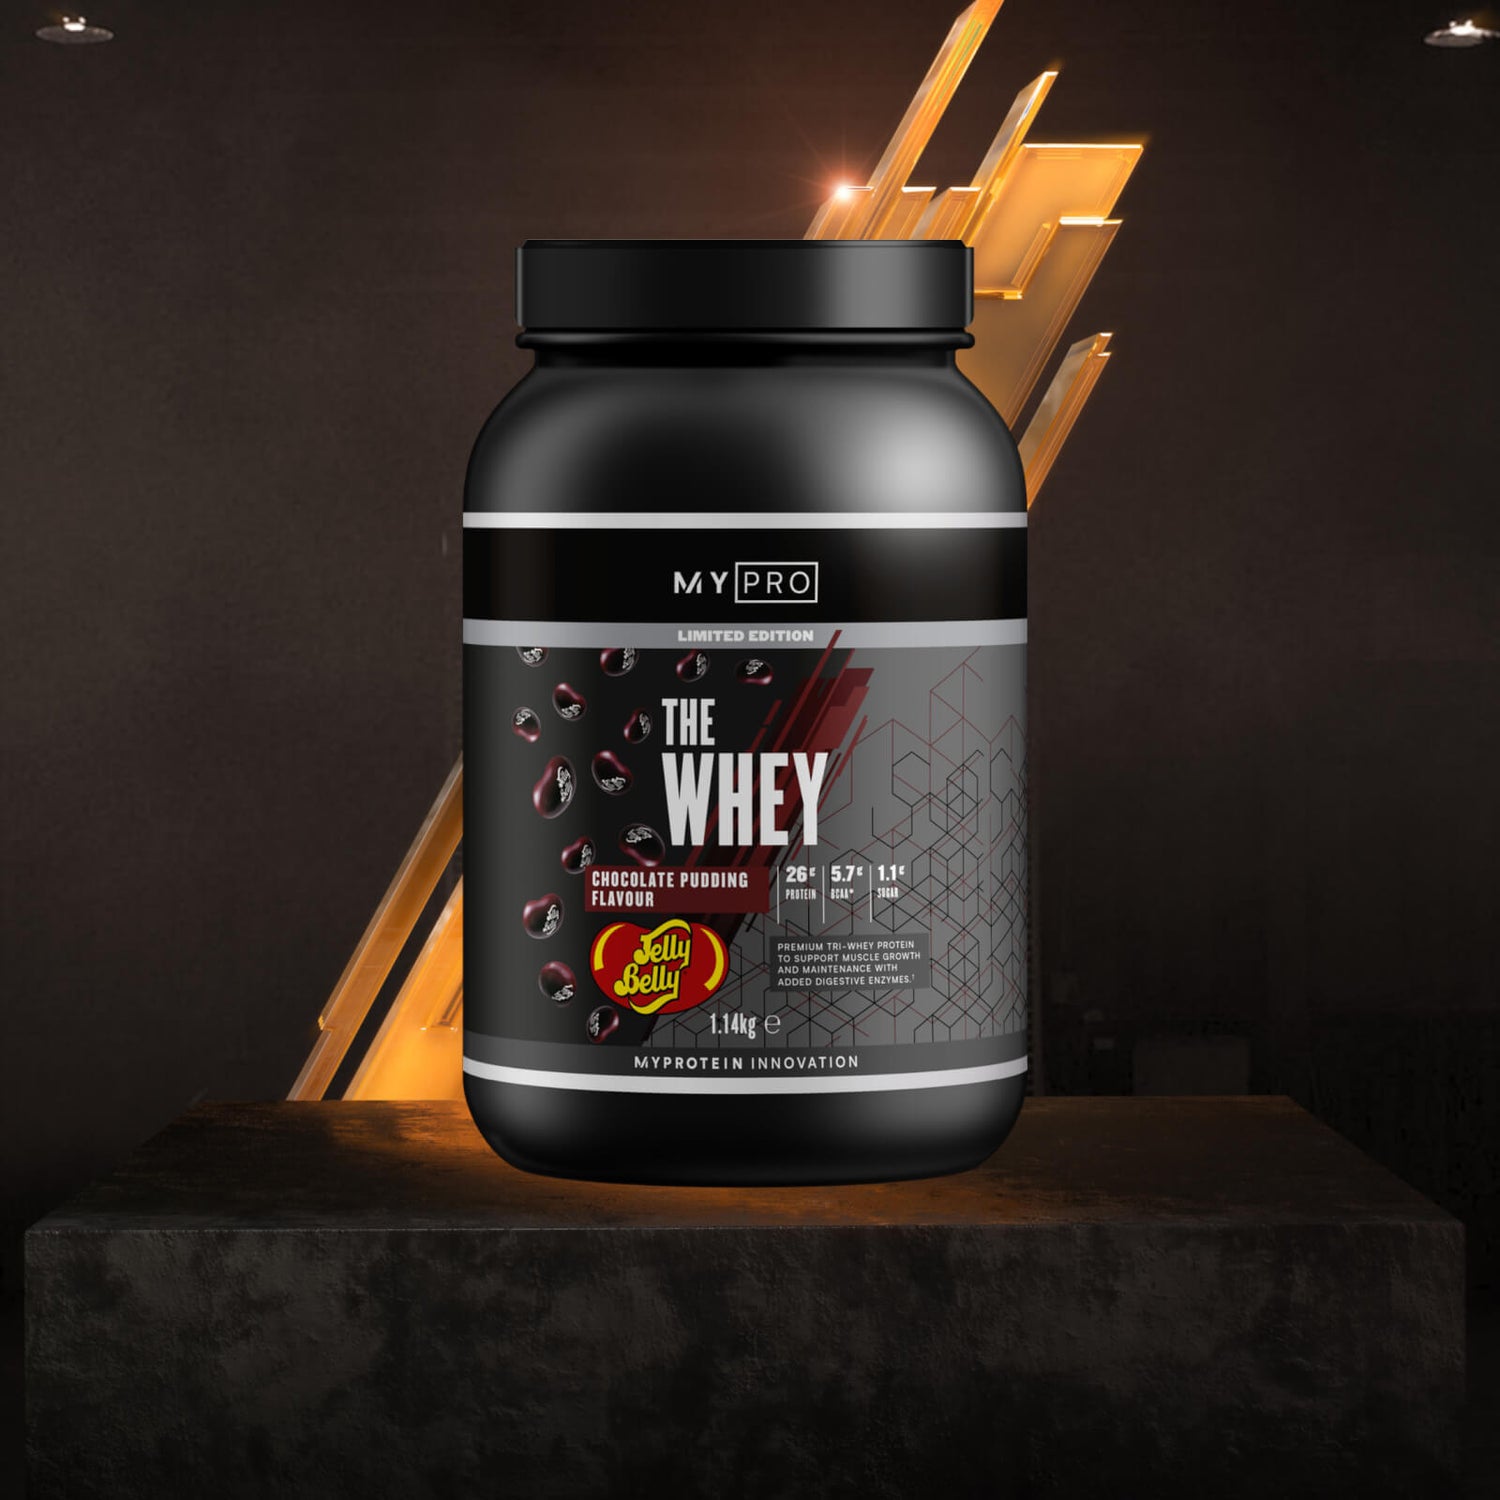 THE Whey - 30raciones - Jelly Belly - Chocolate Pudding